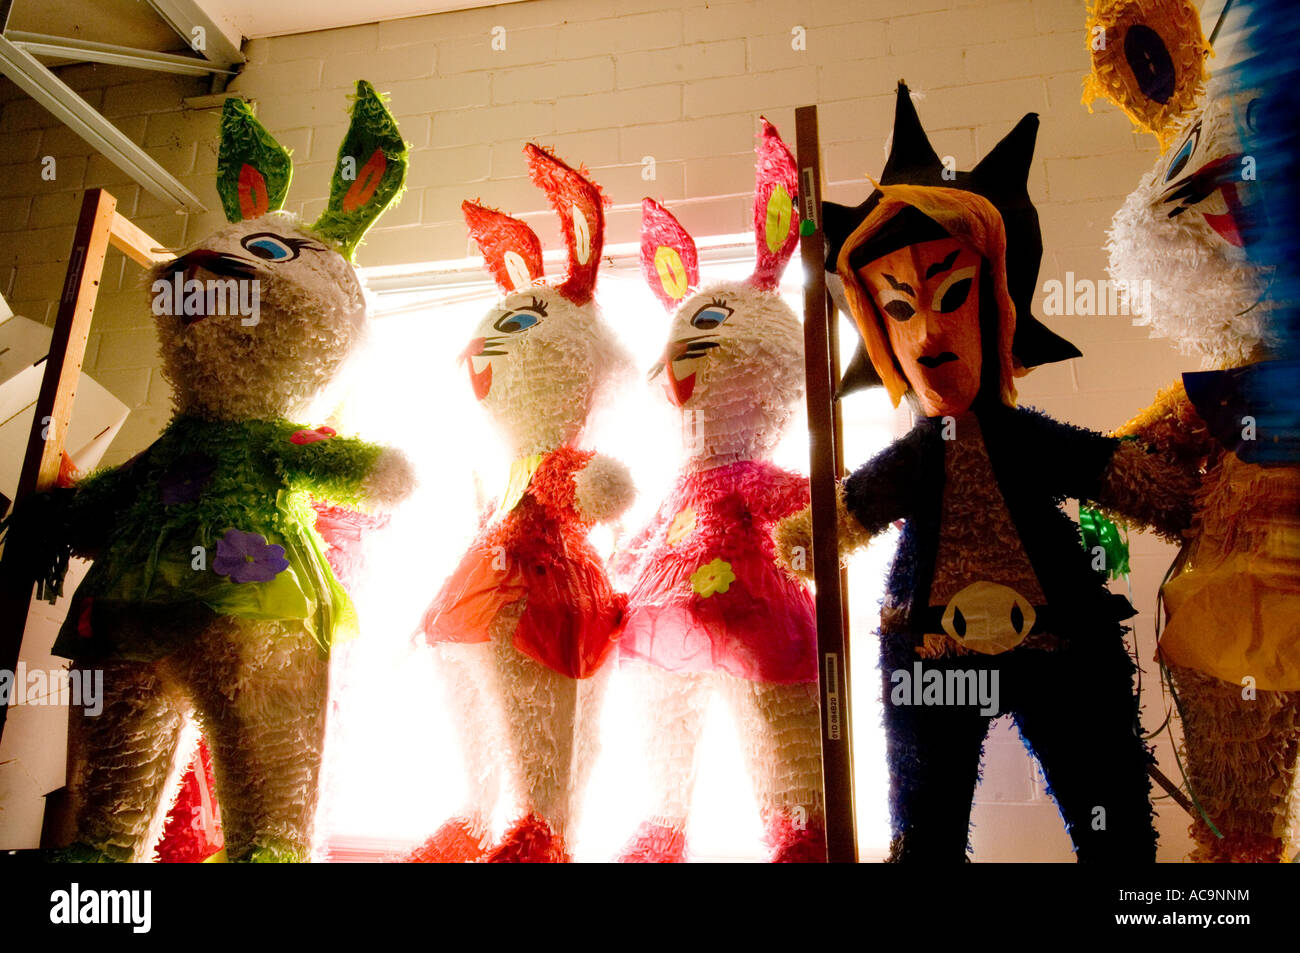 Bunny Shaped Pinatas Backlit in Window Stock Photo